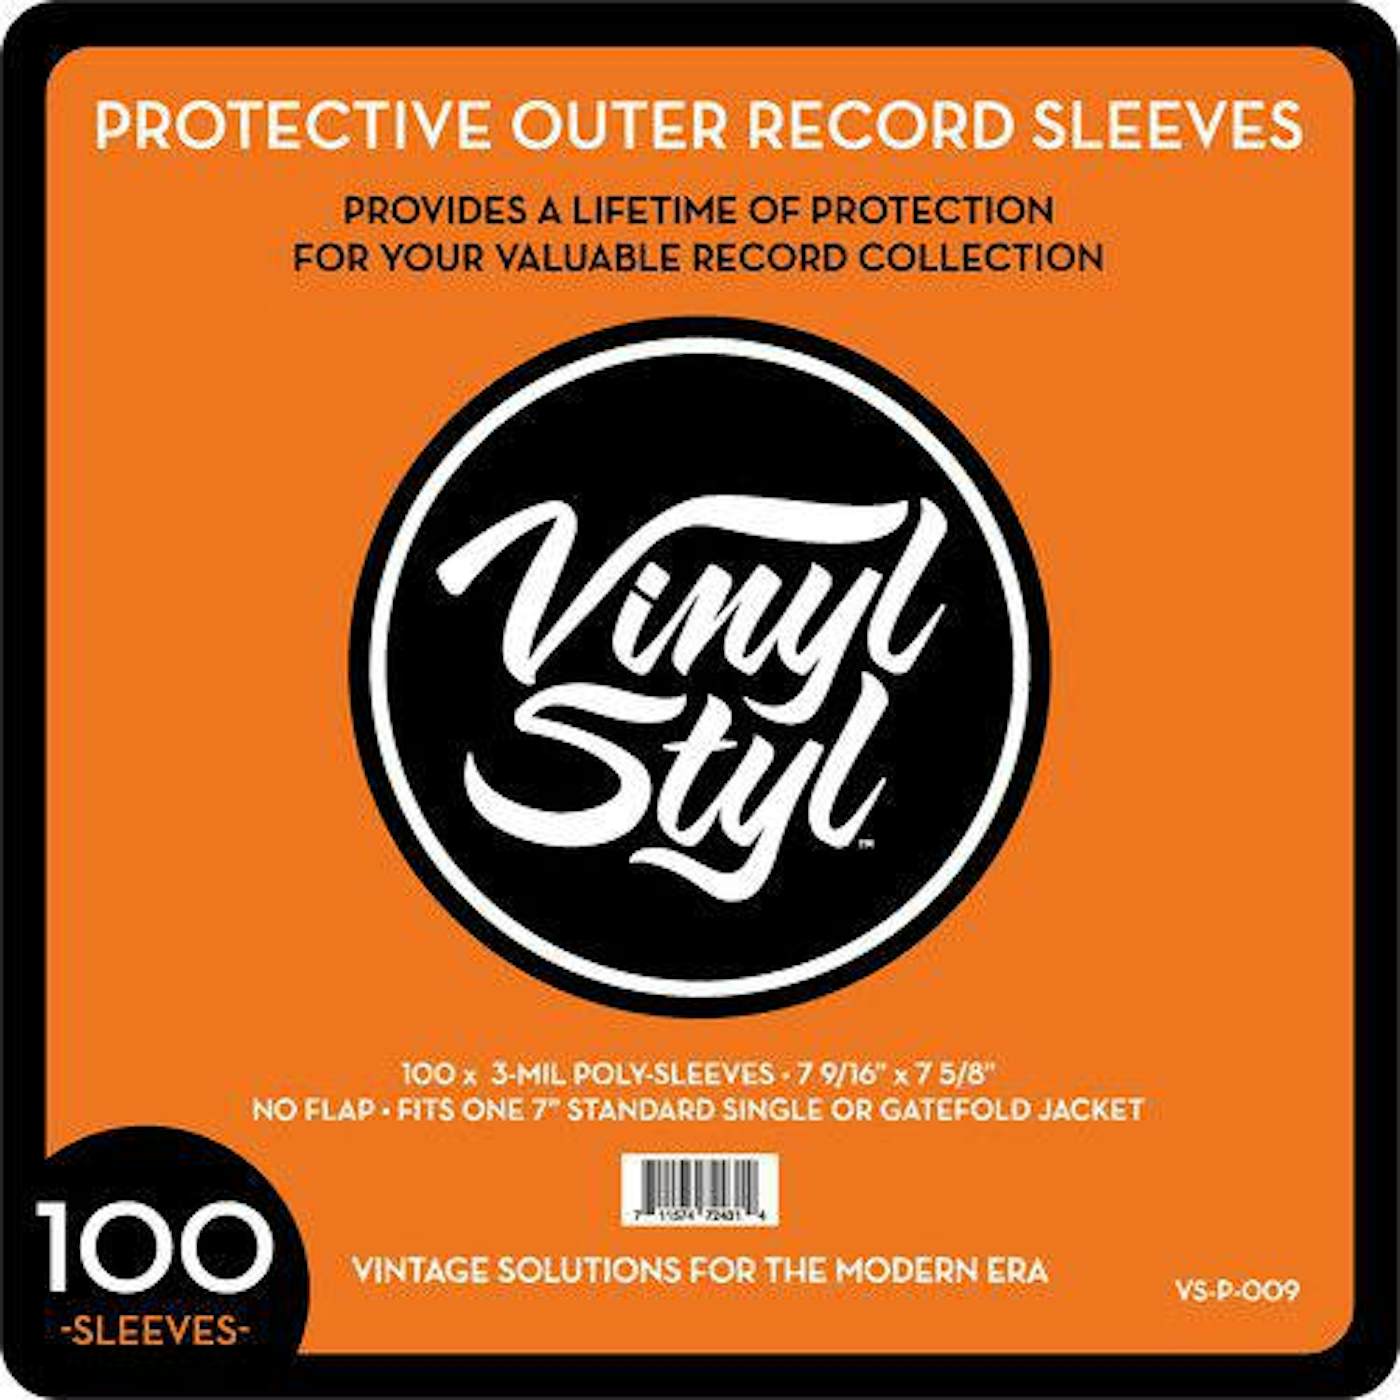 Vinyl accessories Vinyl Styl 45 RPM Record Outer Sleeve 100 CNT Clr